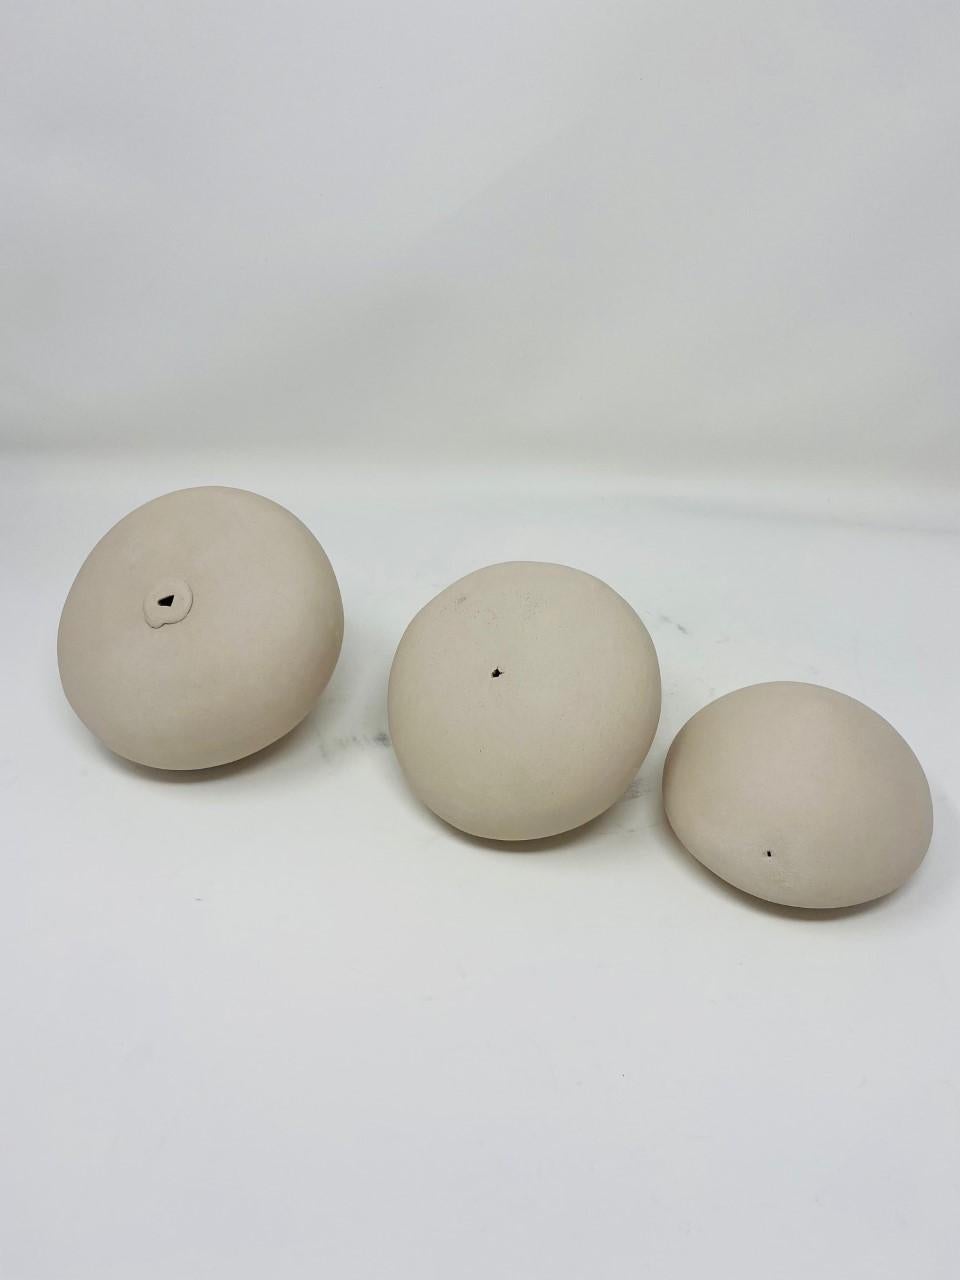 Minimalist Abstract Cocoon Shaped Ceramic Sculptures by Artist Judith Pike 1990s For Sale 2